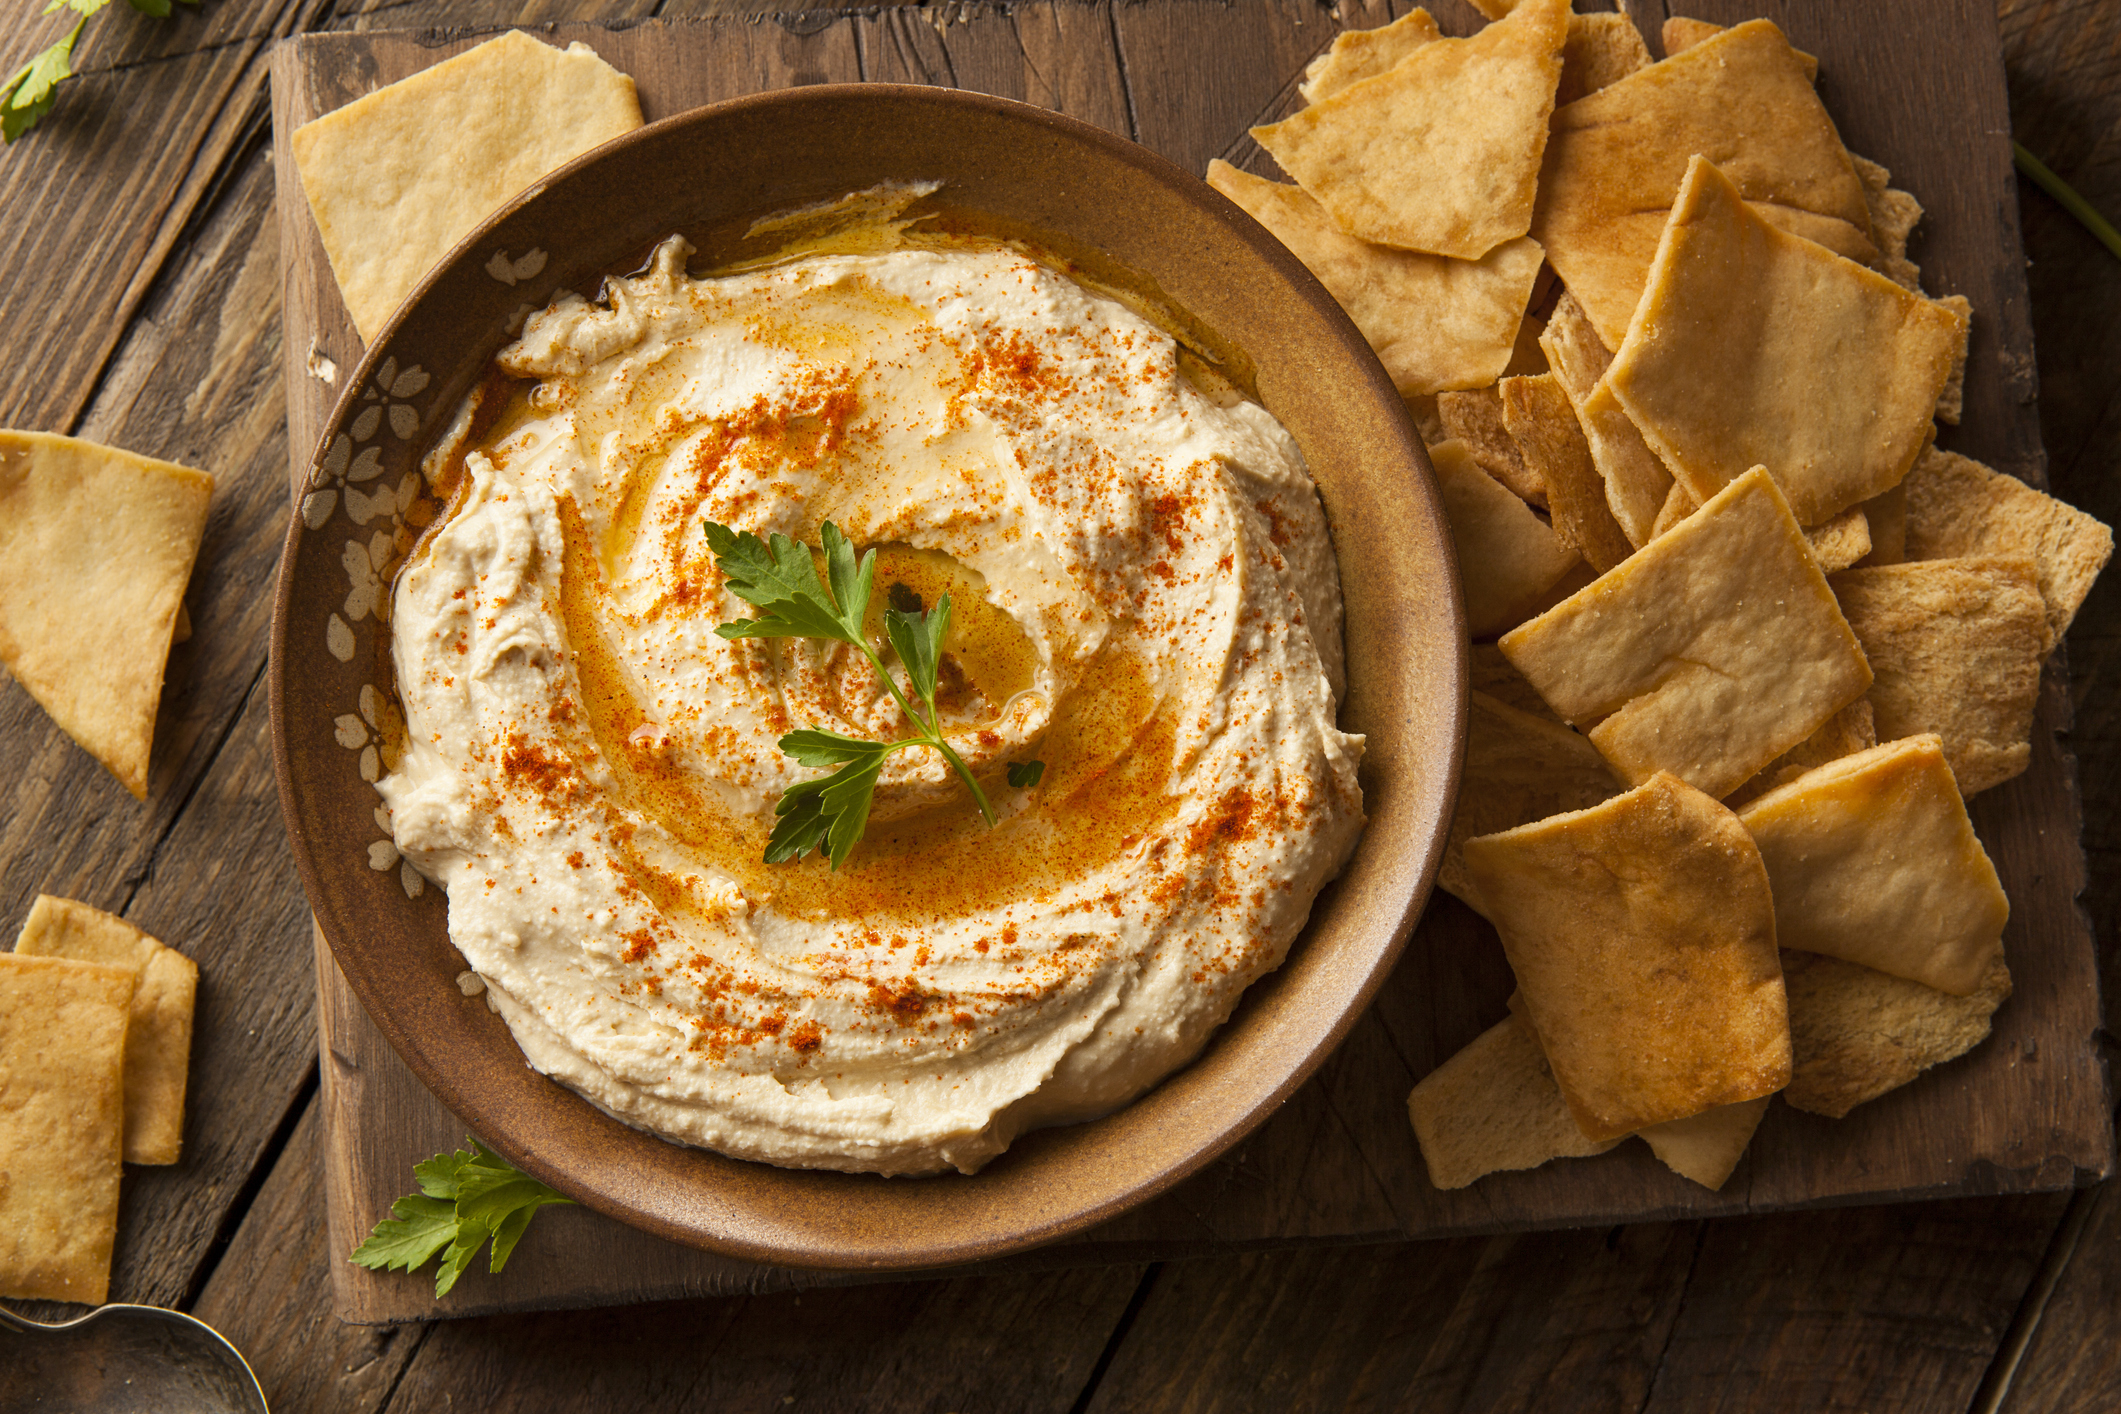 Watch out for these glyphosate-containing hummus brands